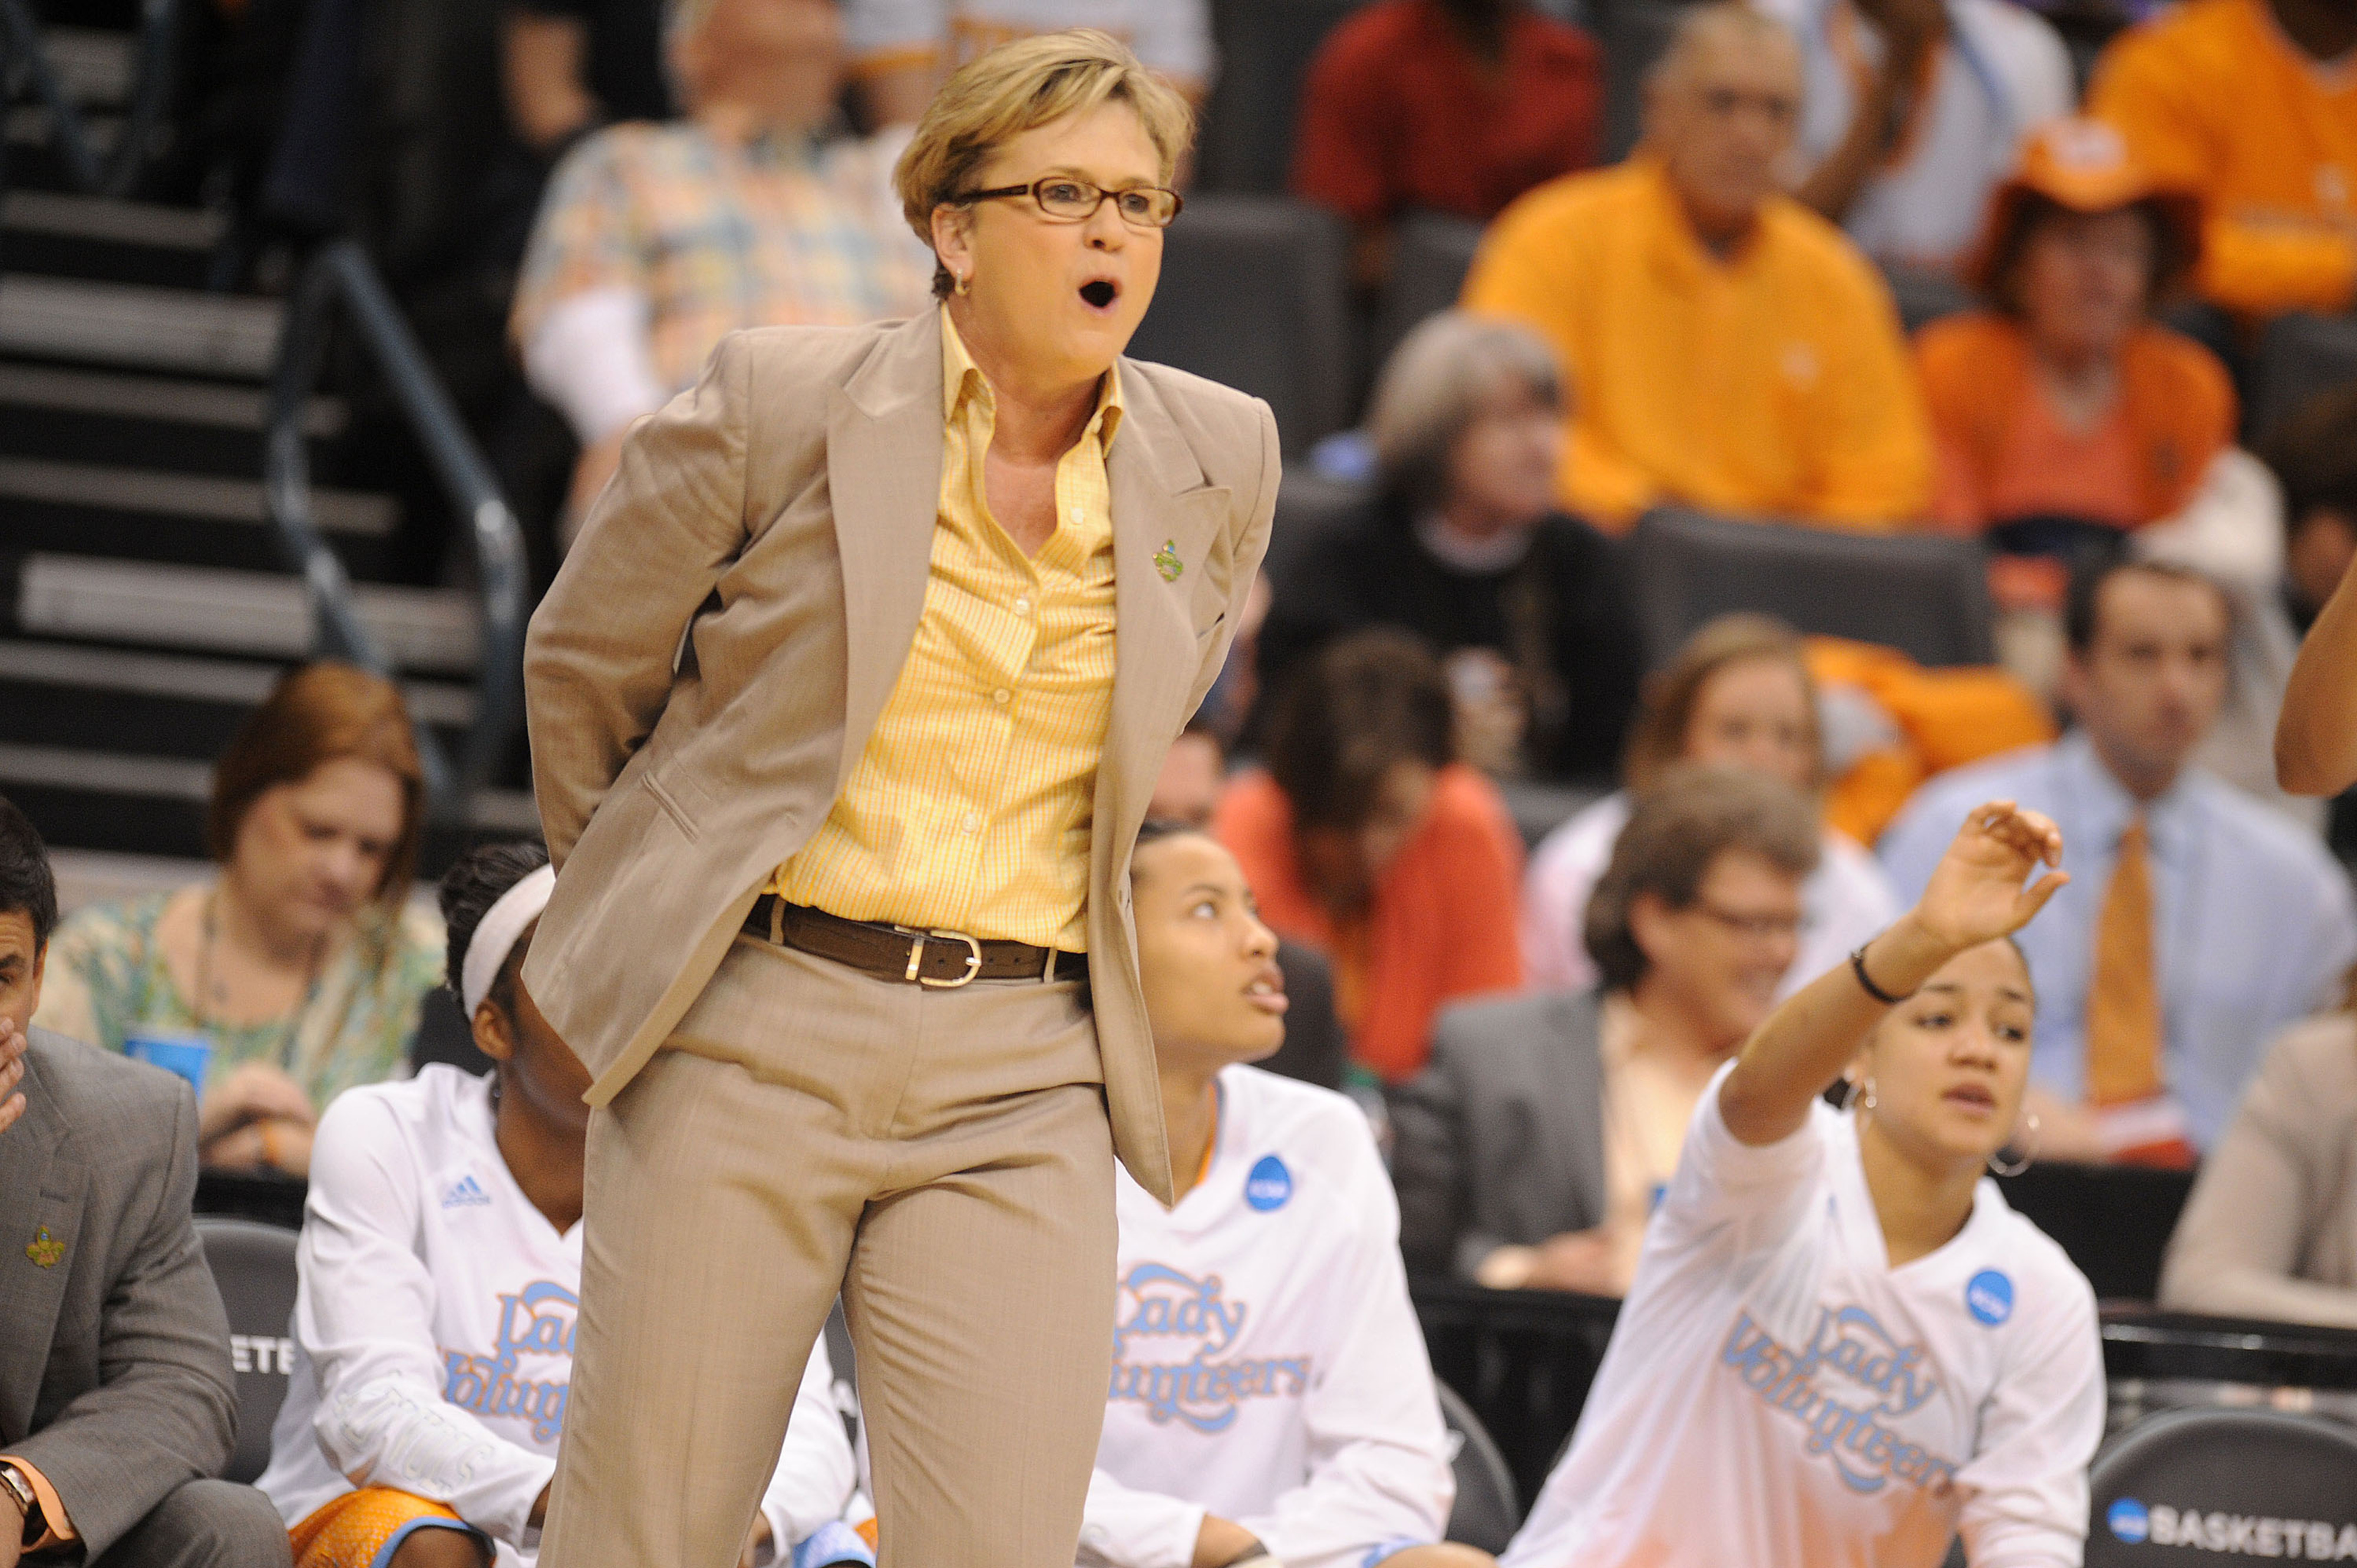 Holly Warlick will have a chance to get to her first Final Four as the head coach of the Tennessee Lady Volunteers.